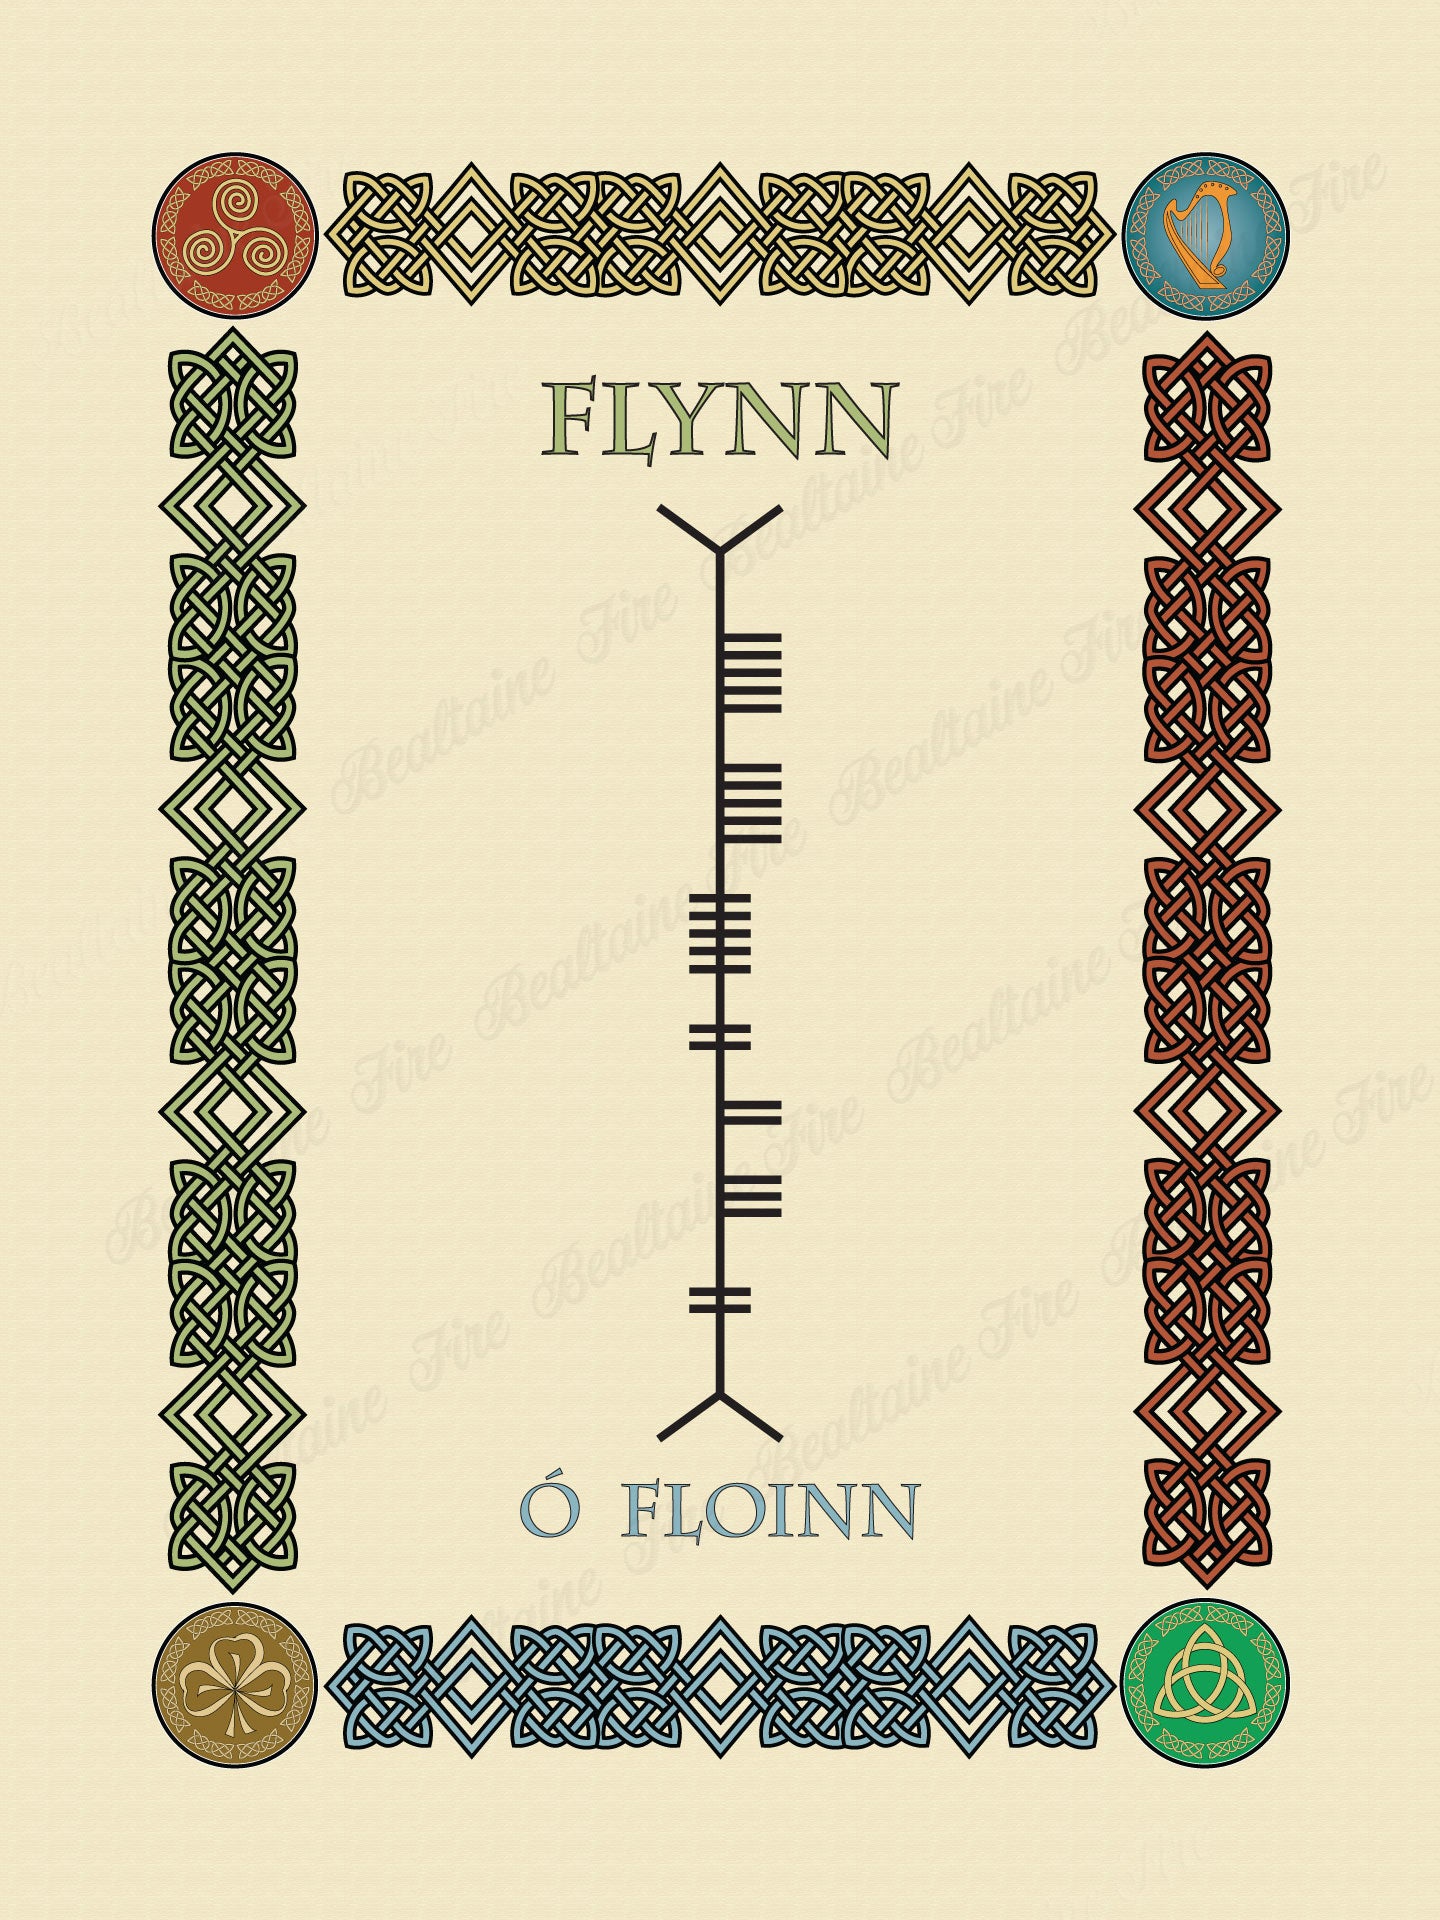 Flynn in Old Irish and Ogham - PDF Download